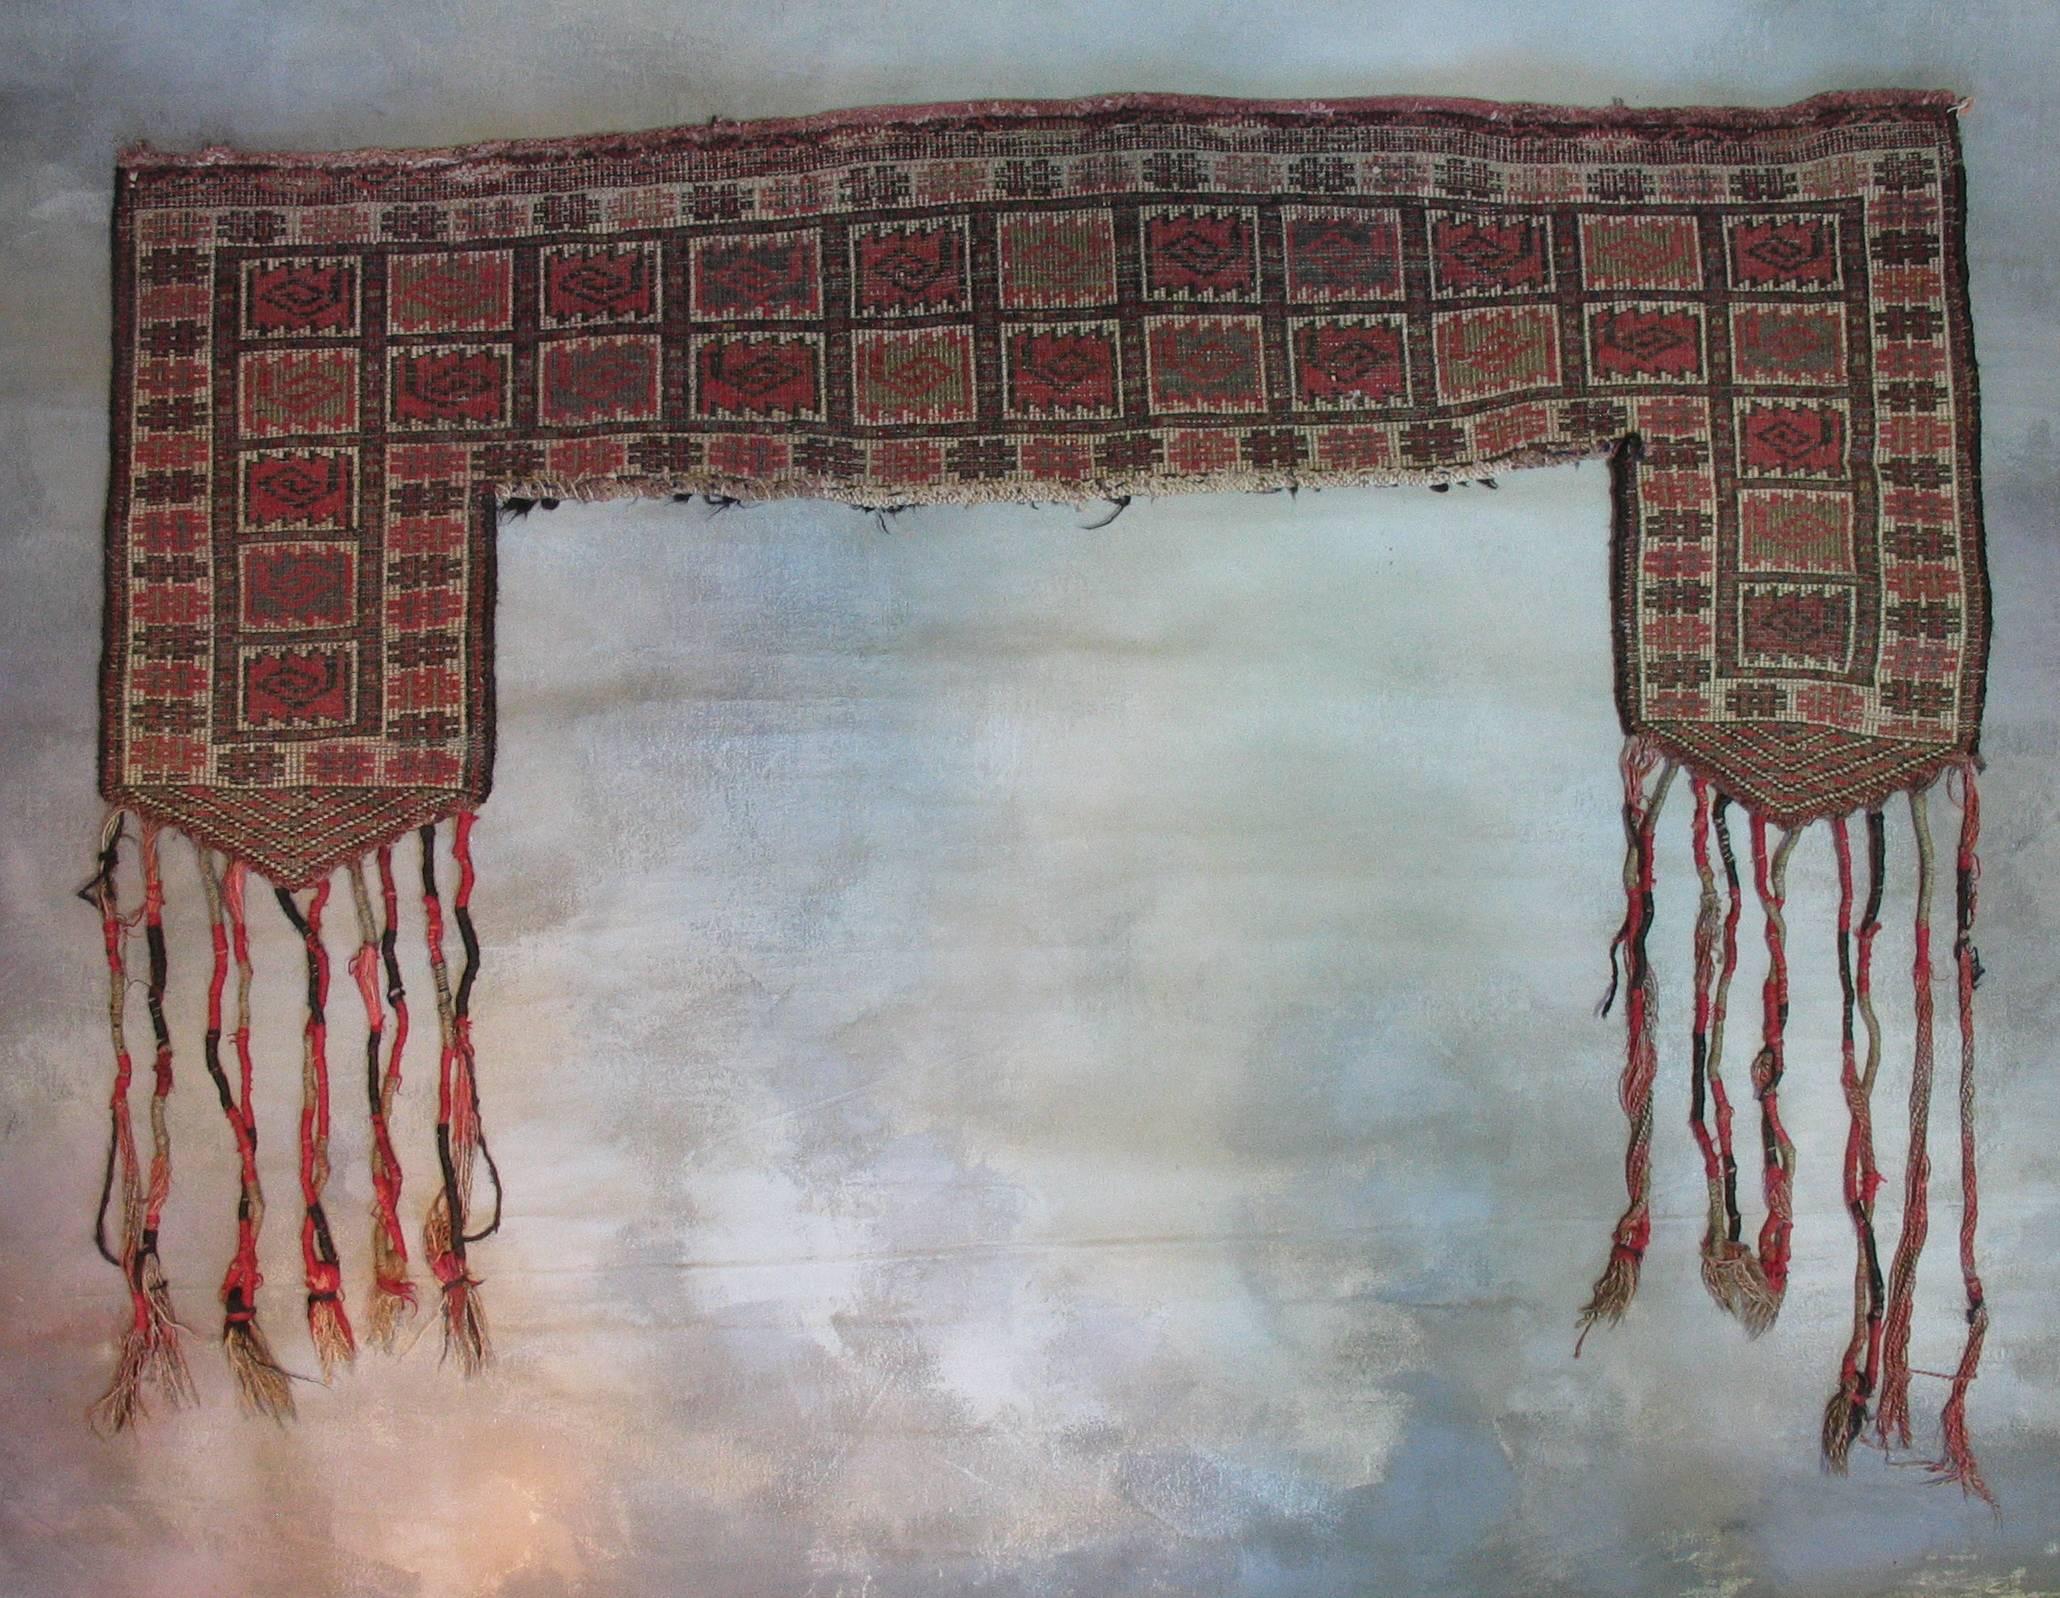 Ersari Kapunuk Turkmenistan wool rug or entrance doorway decoration, Second half of the 19th century, wool pile, wool warp and wool weft, in red and earthtone colors, with long decorative tassels. This is used for Yurt or tent opening decoration.